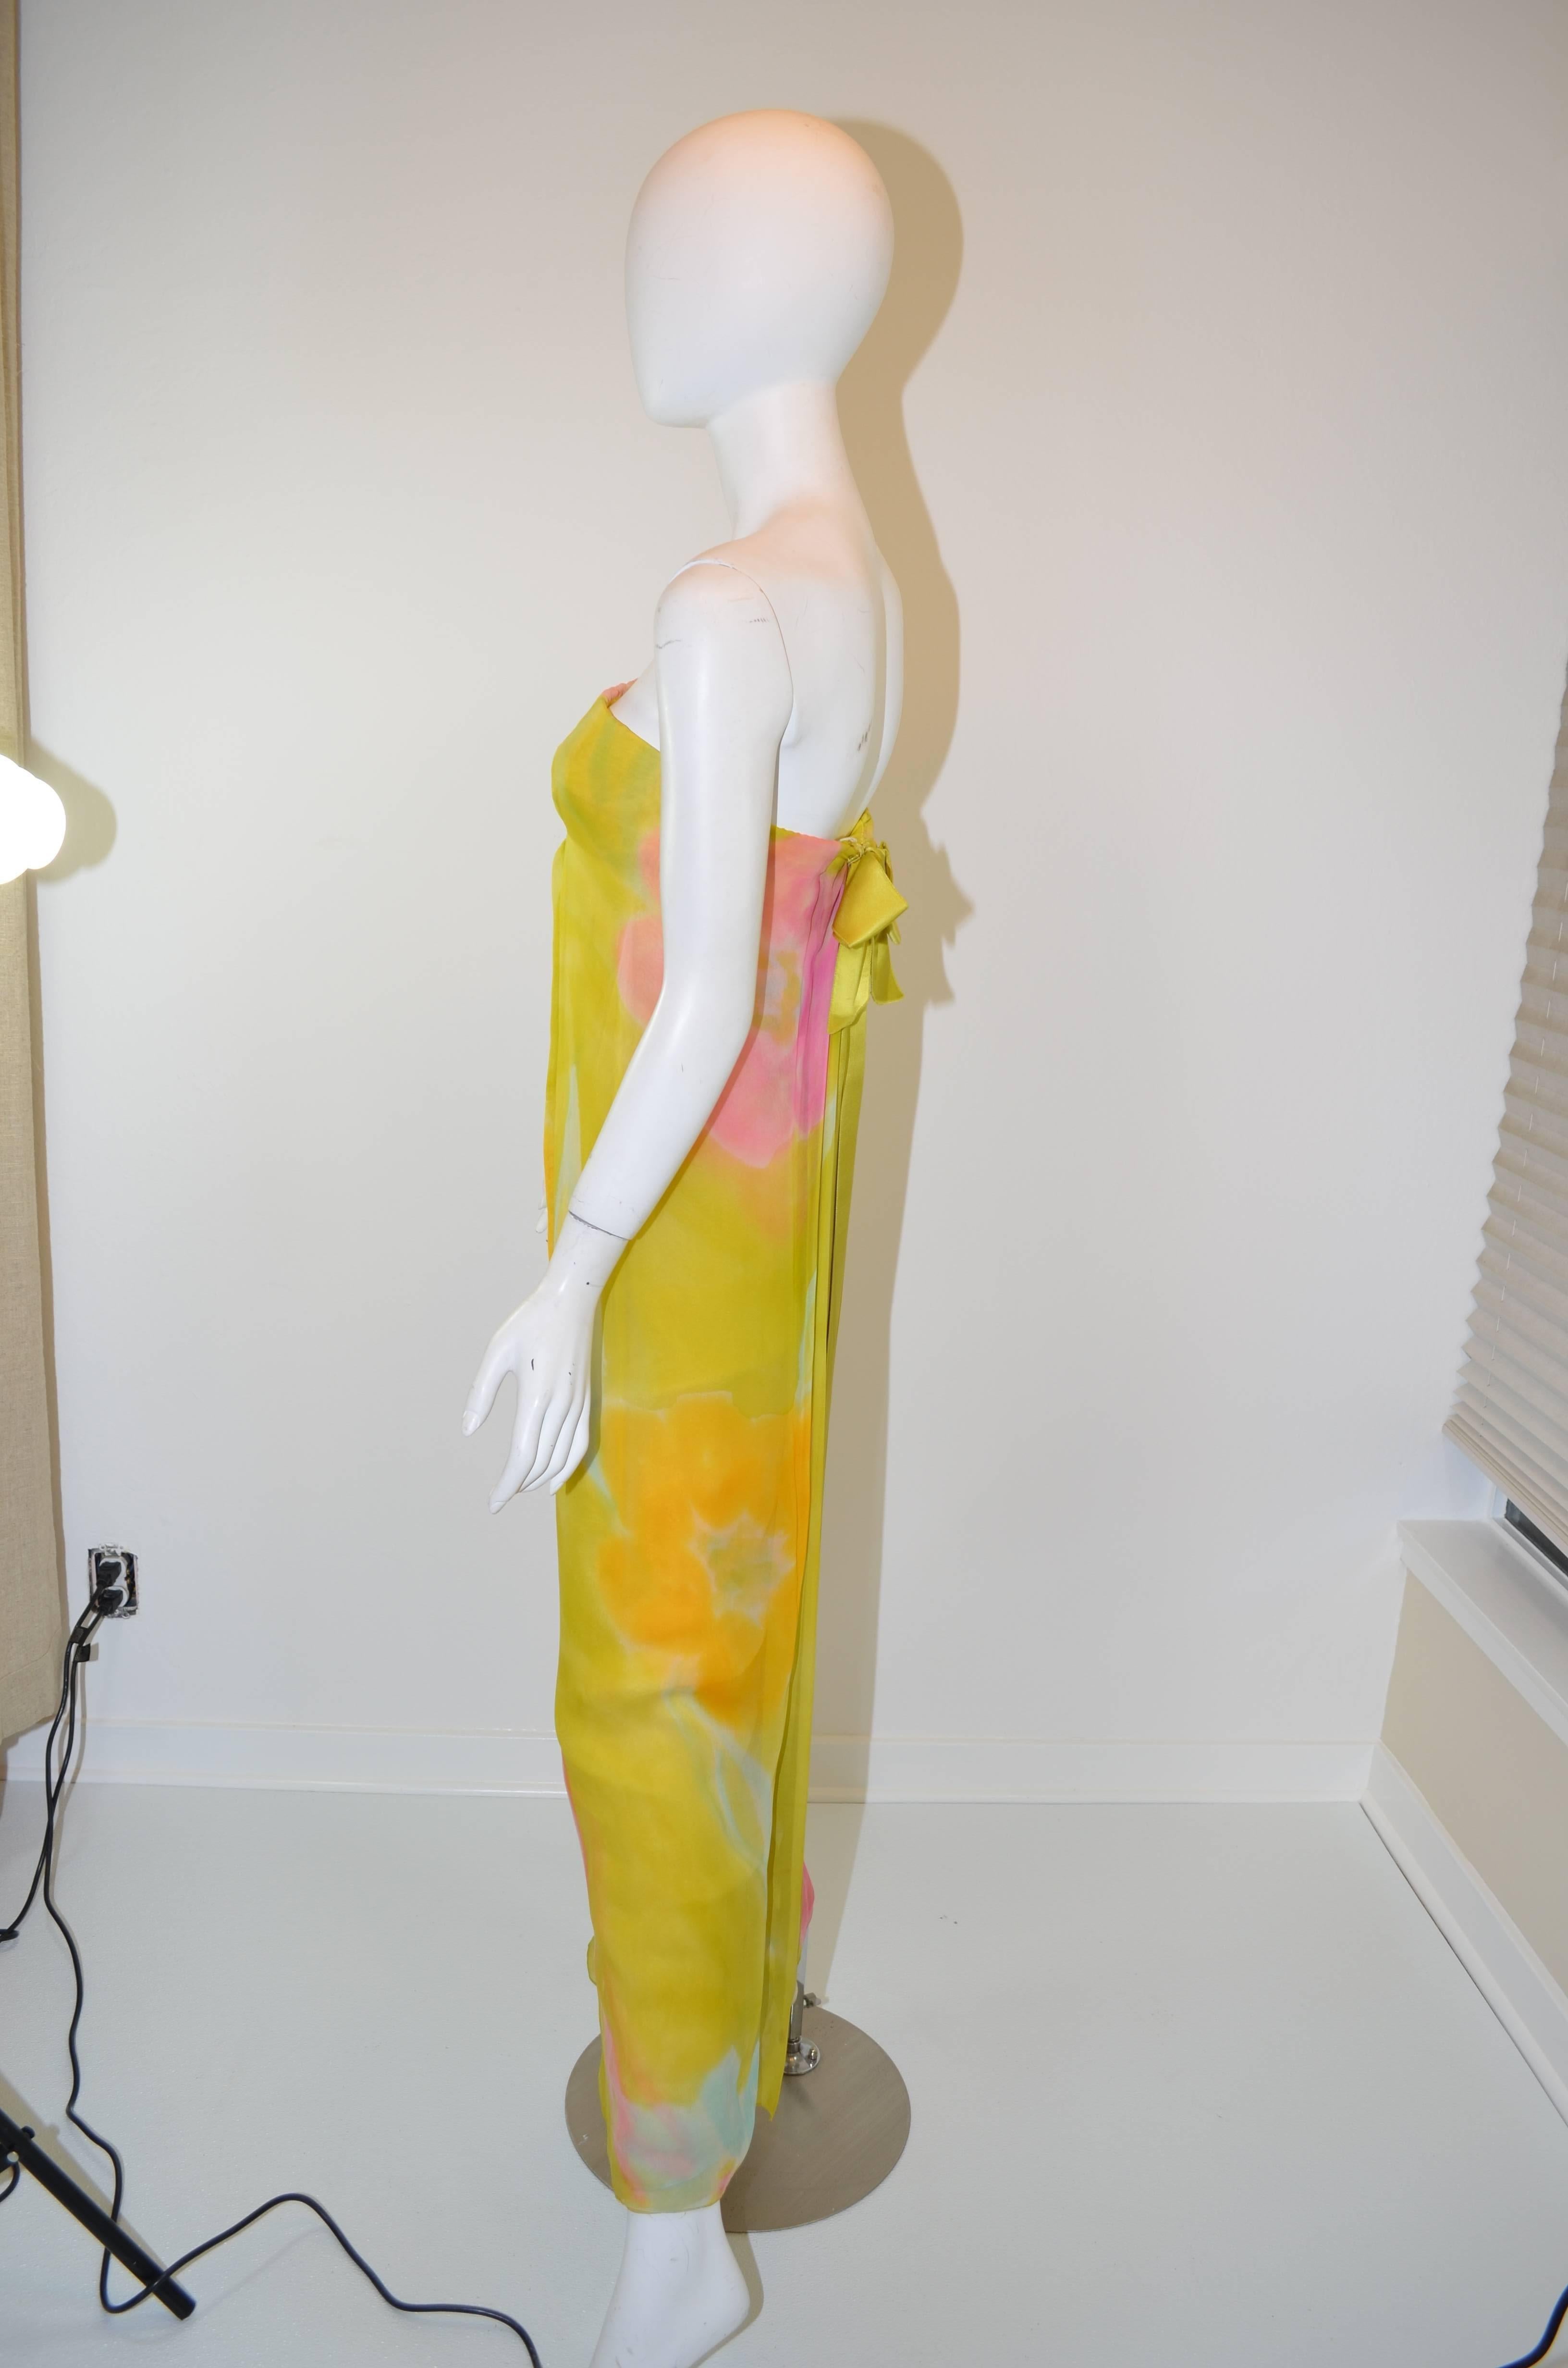 Beautiful vintage 1960's Sarmi chiffon strapless evening gown. Featuring yellow, green, and pink chiffon floral pattern, with a satin bow in the back that snaps closed over the back of the gown. Built in boned bodice holds the gown up. The bow's